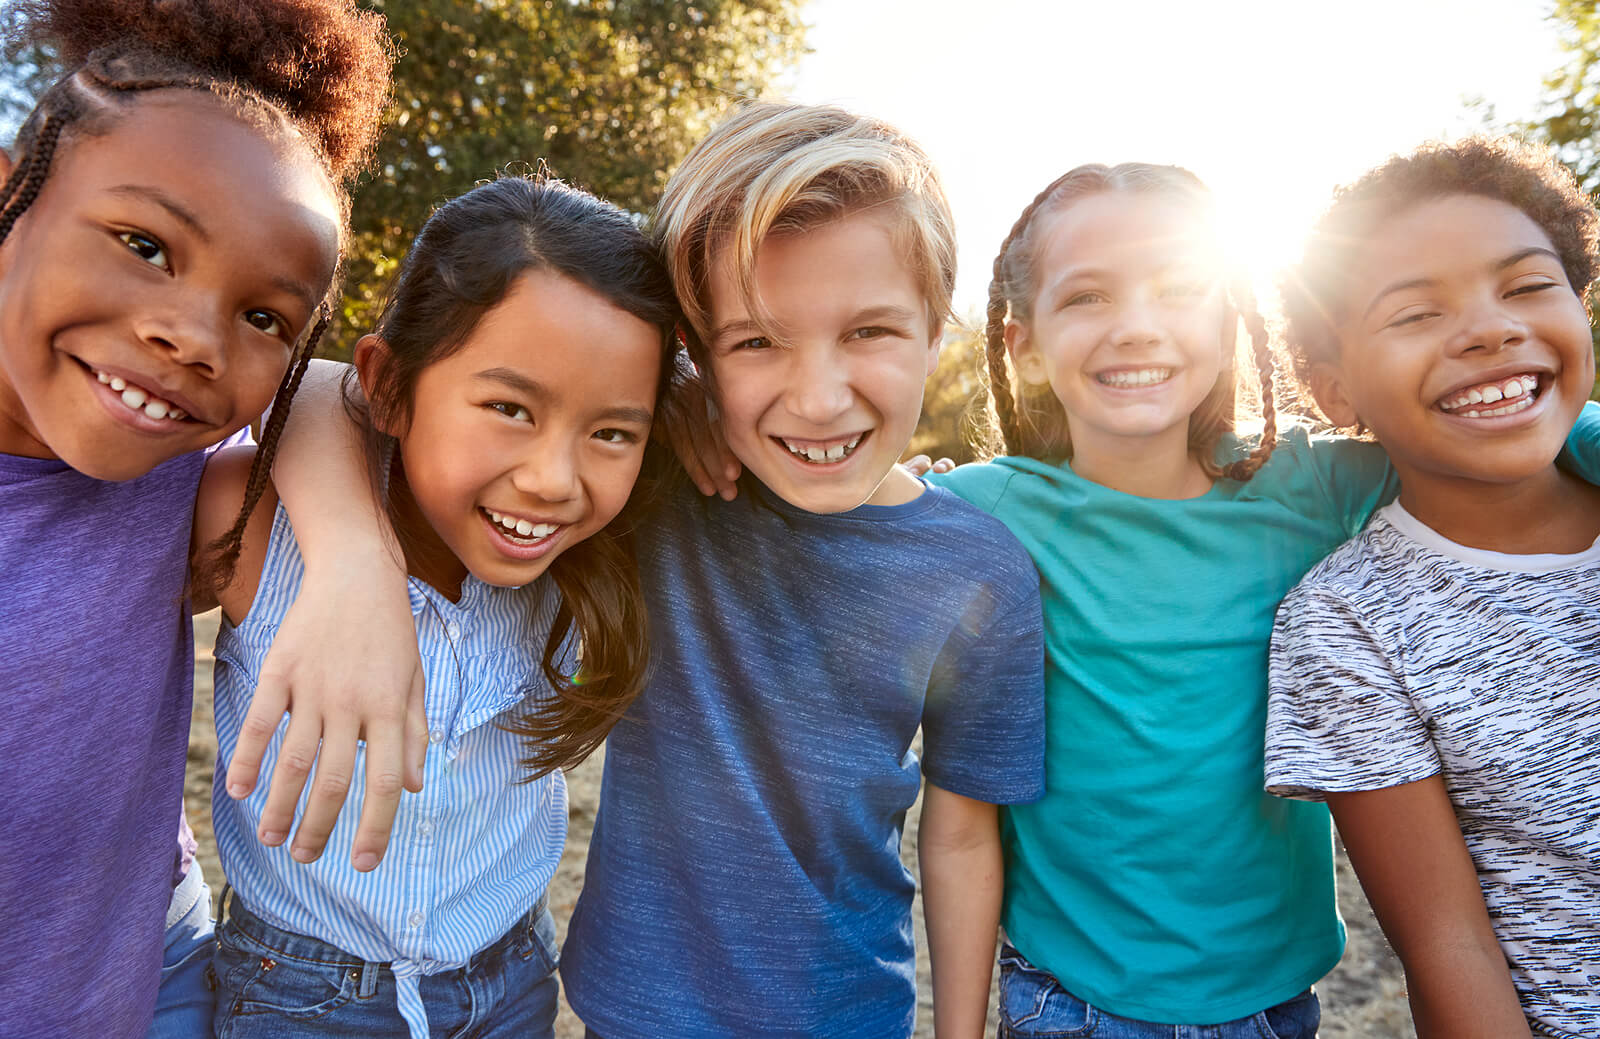 A diverse group of children smiling with their arms around one another.